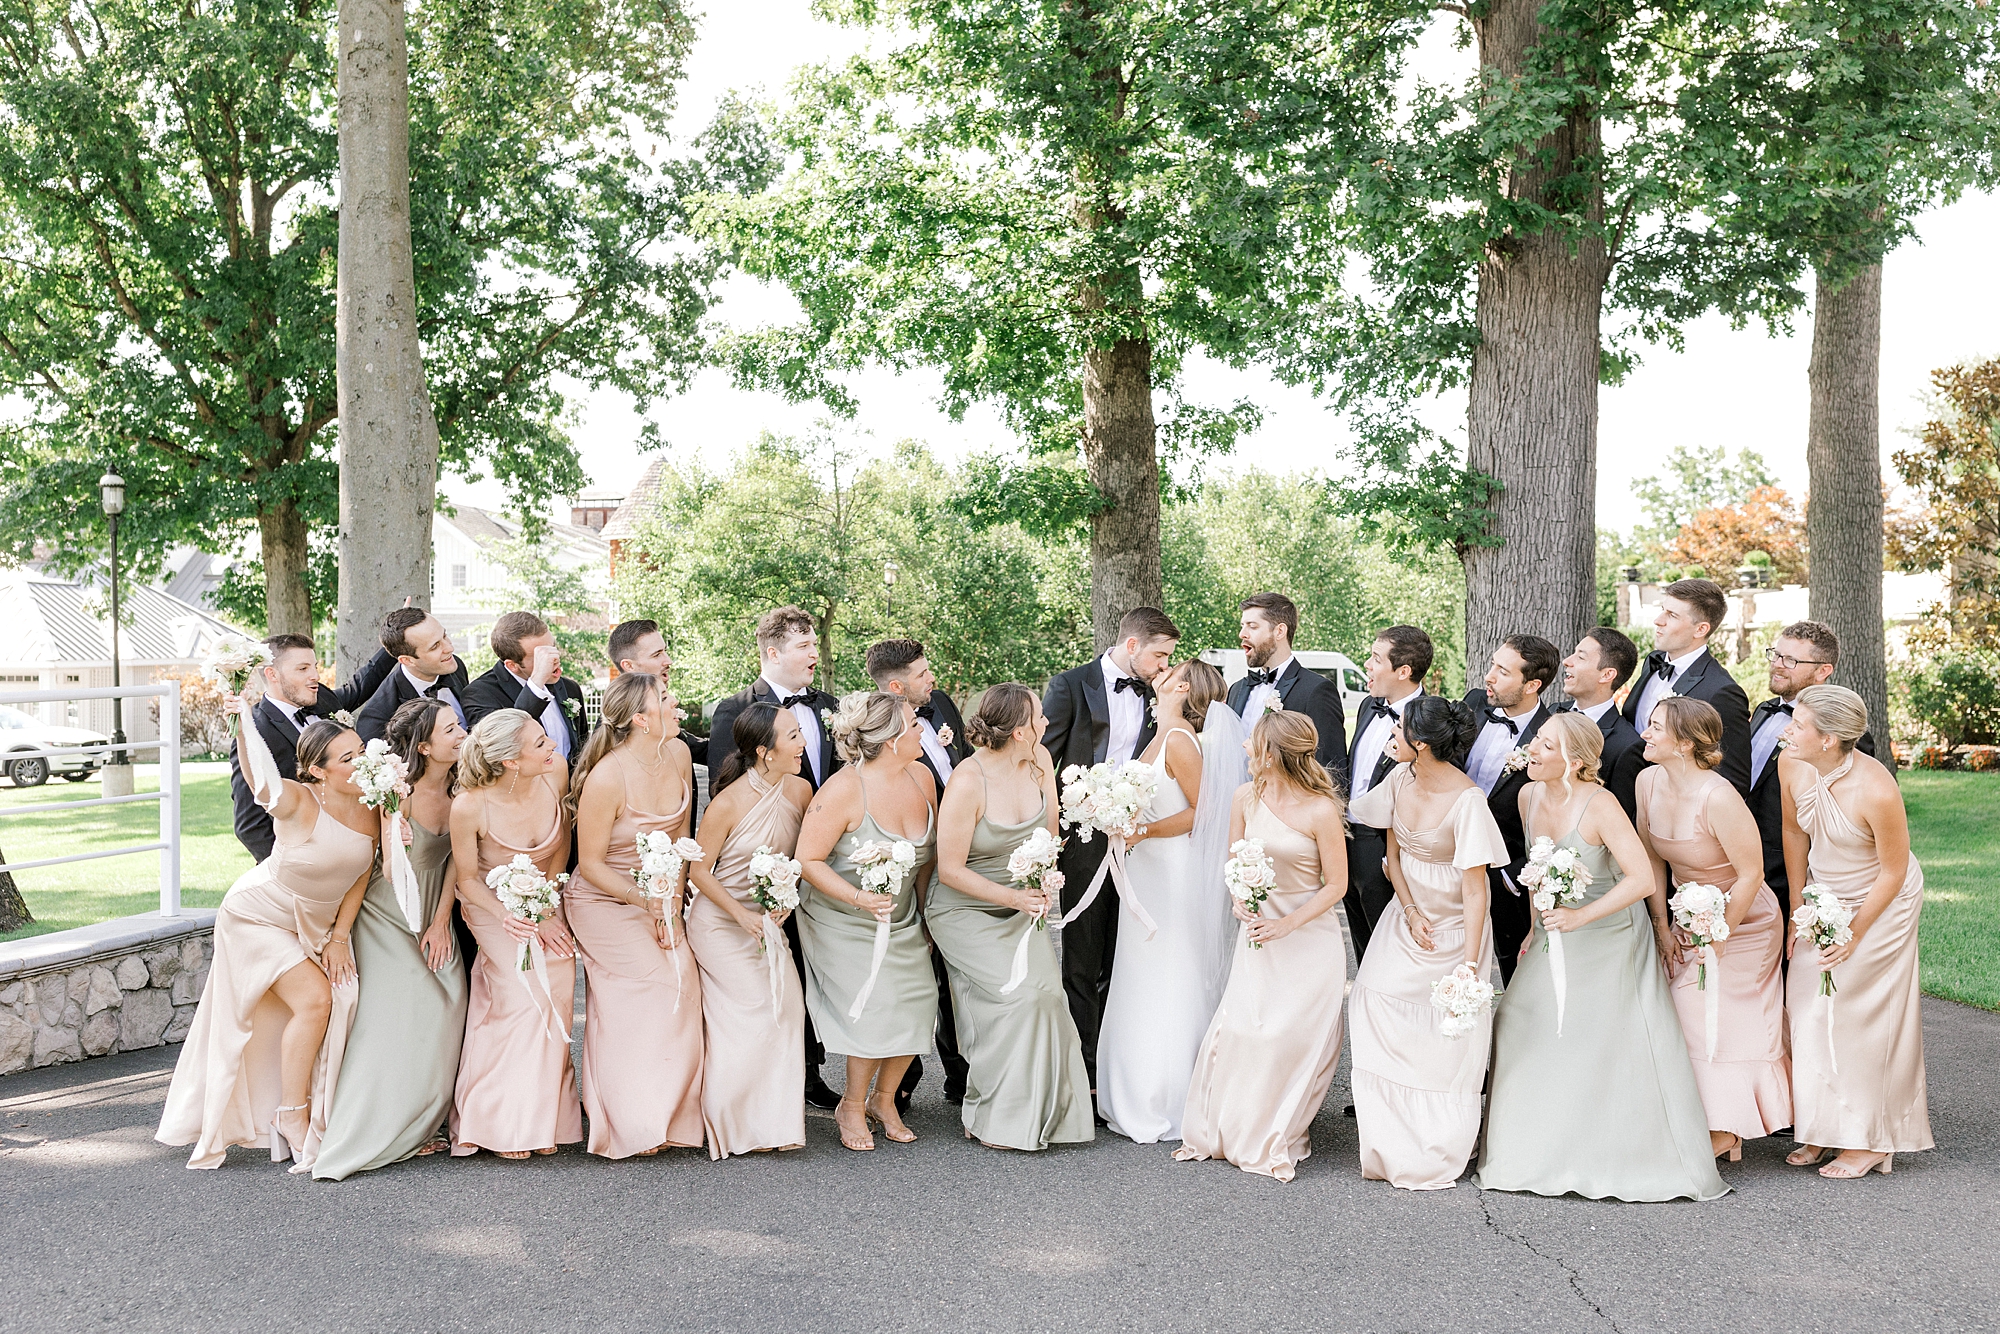 newlyweds kiss surrounded by wedding party in pink, green, and black attire